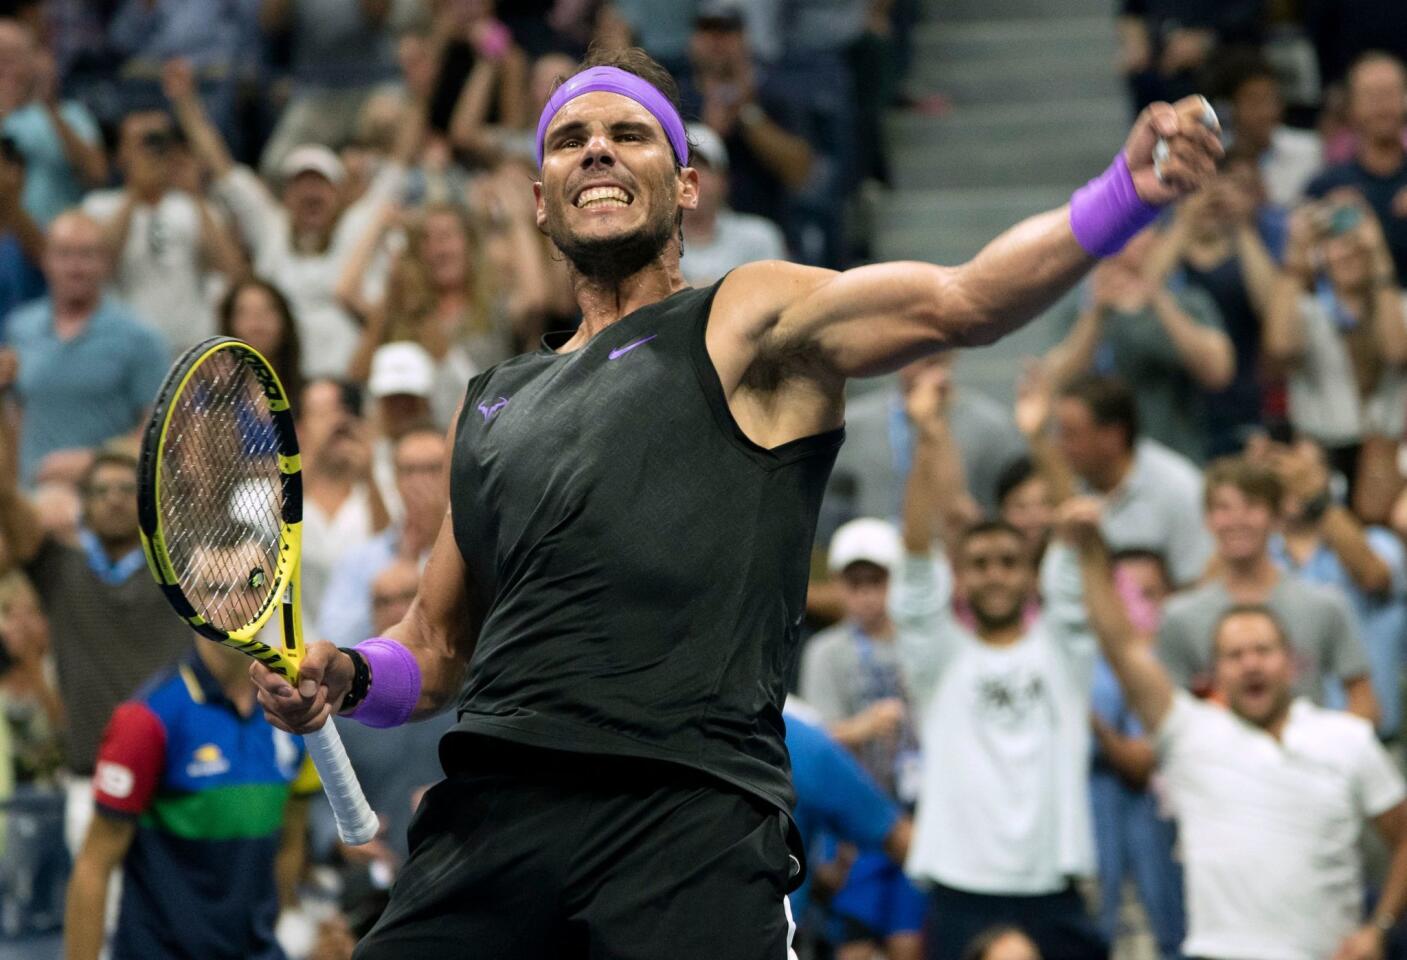 Rafael Nadal of Spain reacts to his victory against Marin Cilic of Croatia in their Round Four Men's Singles tennis match during the 2019 U.S. Open at the USTA Billie Jean King National Tennis Center in New York on Sept. 2, 2019.